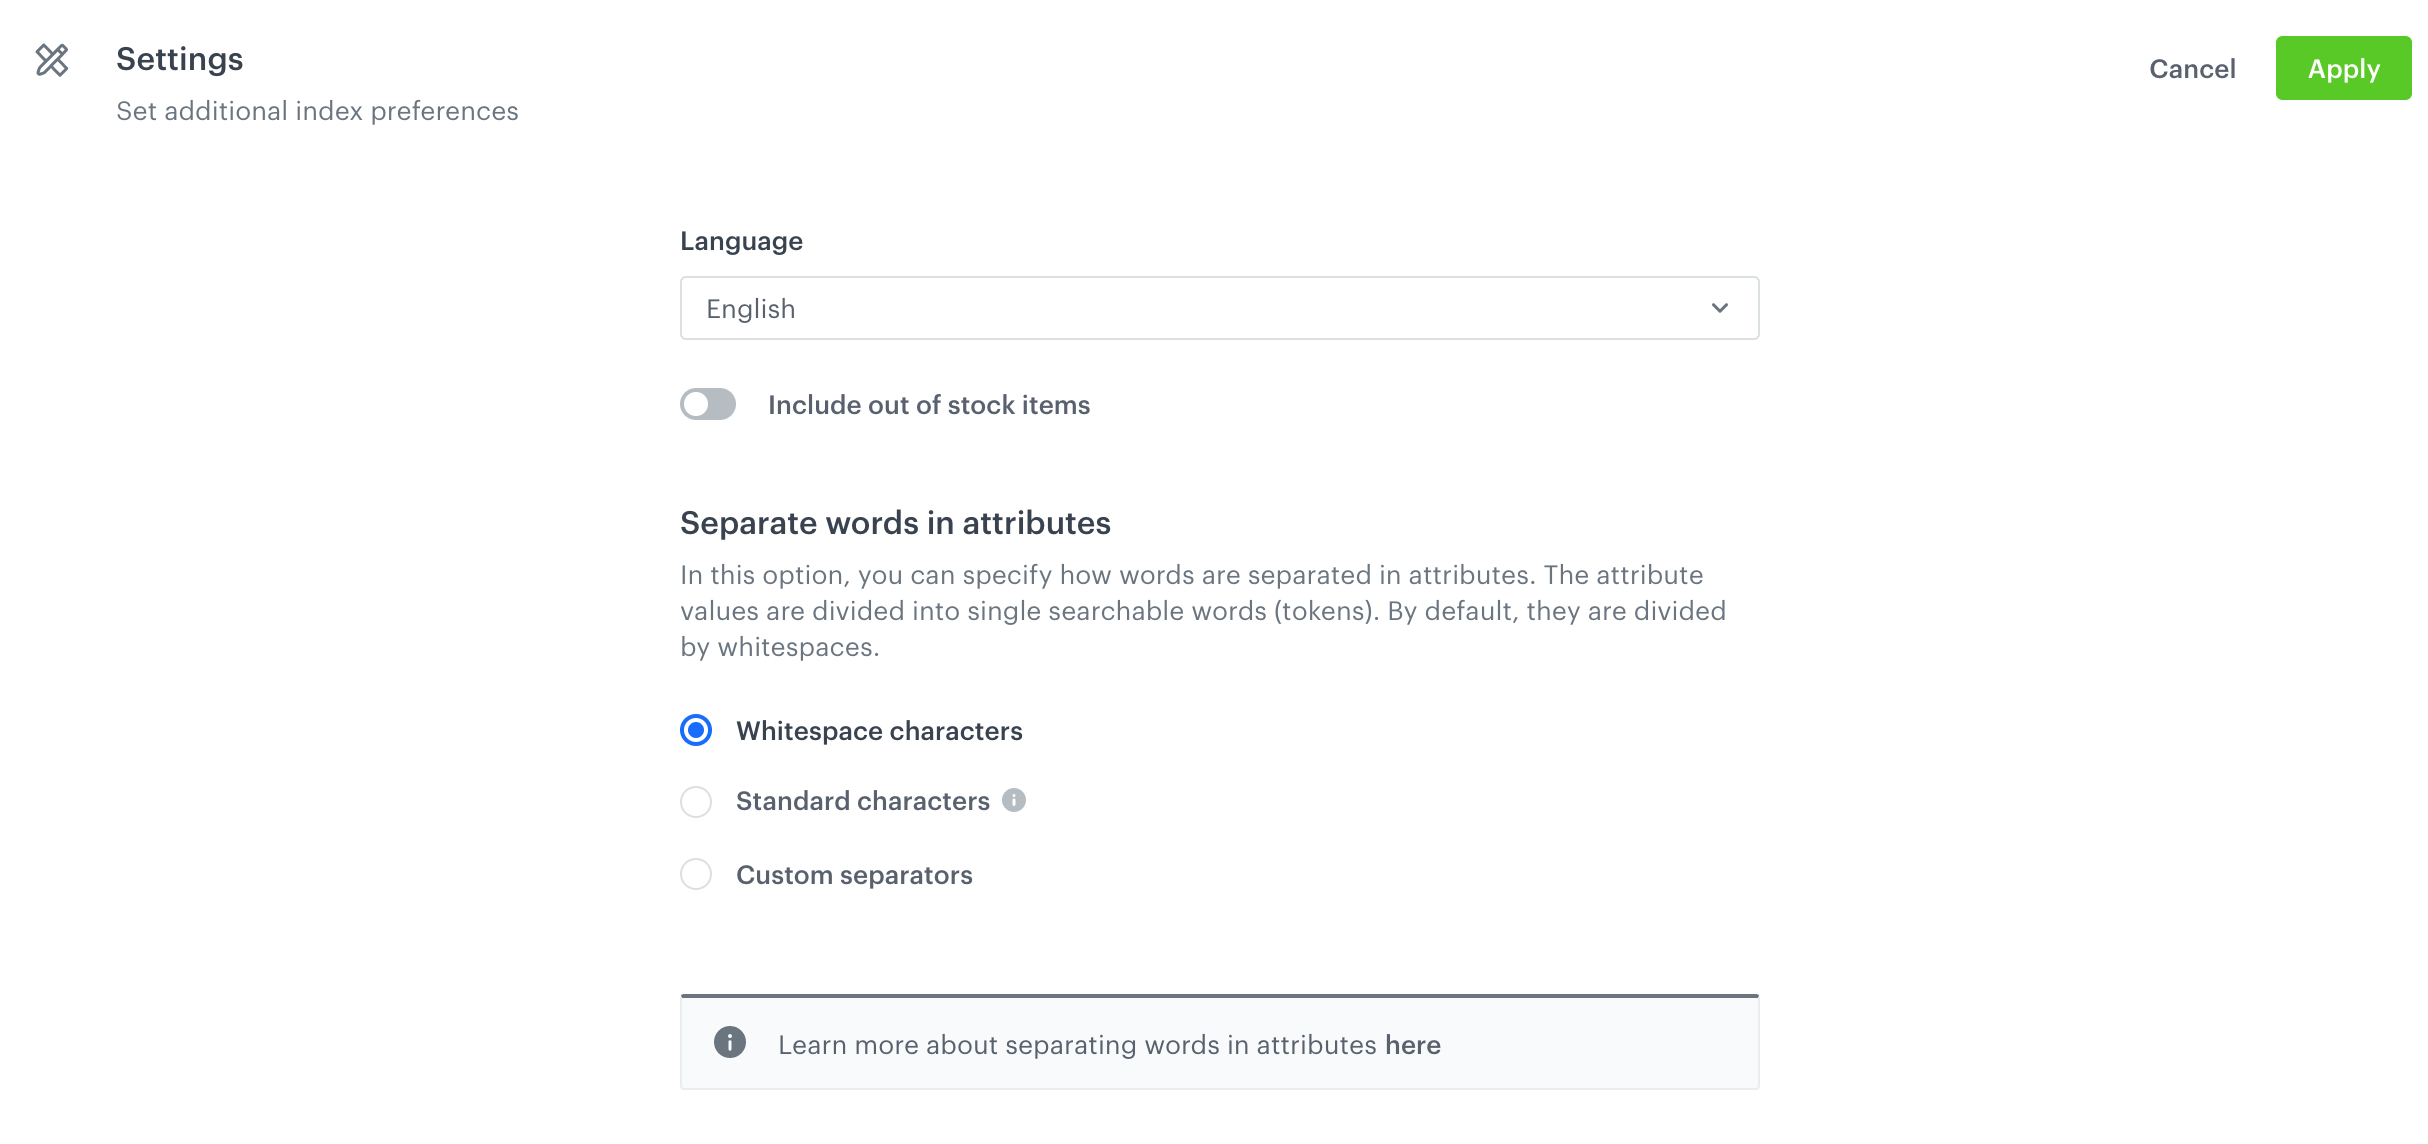 The configuration of settings in AI Search